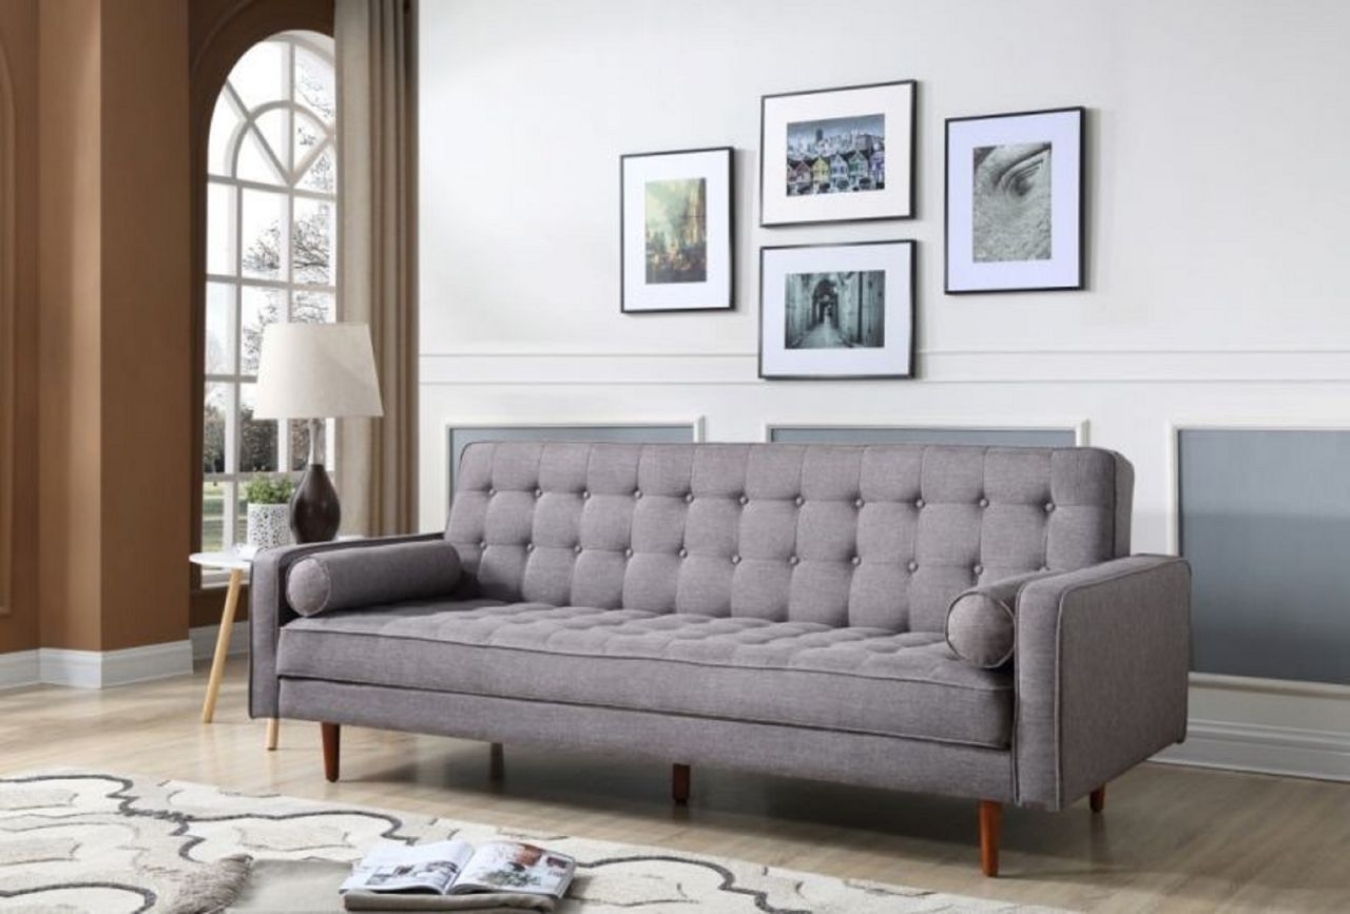 Unique design comes in an assortment of small, easily moved boxes, making Sofia Sofa Bed gives the perfect choice for home.